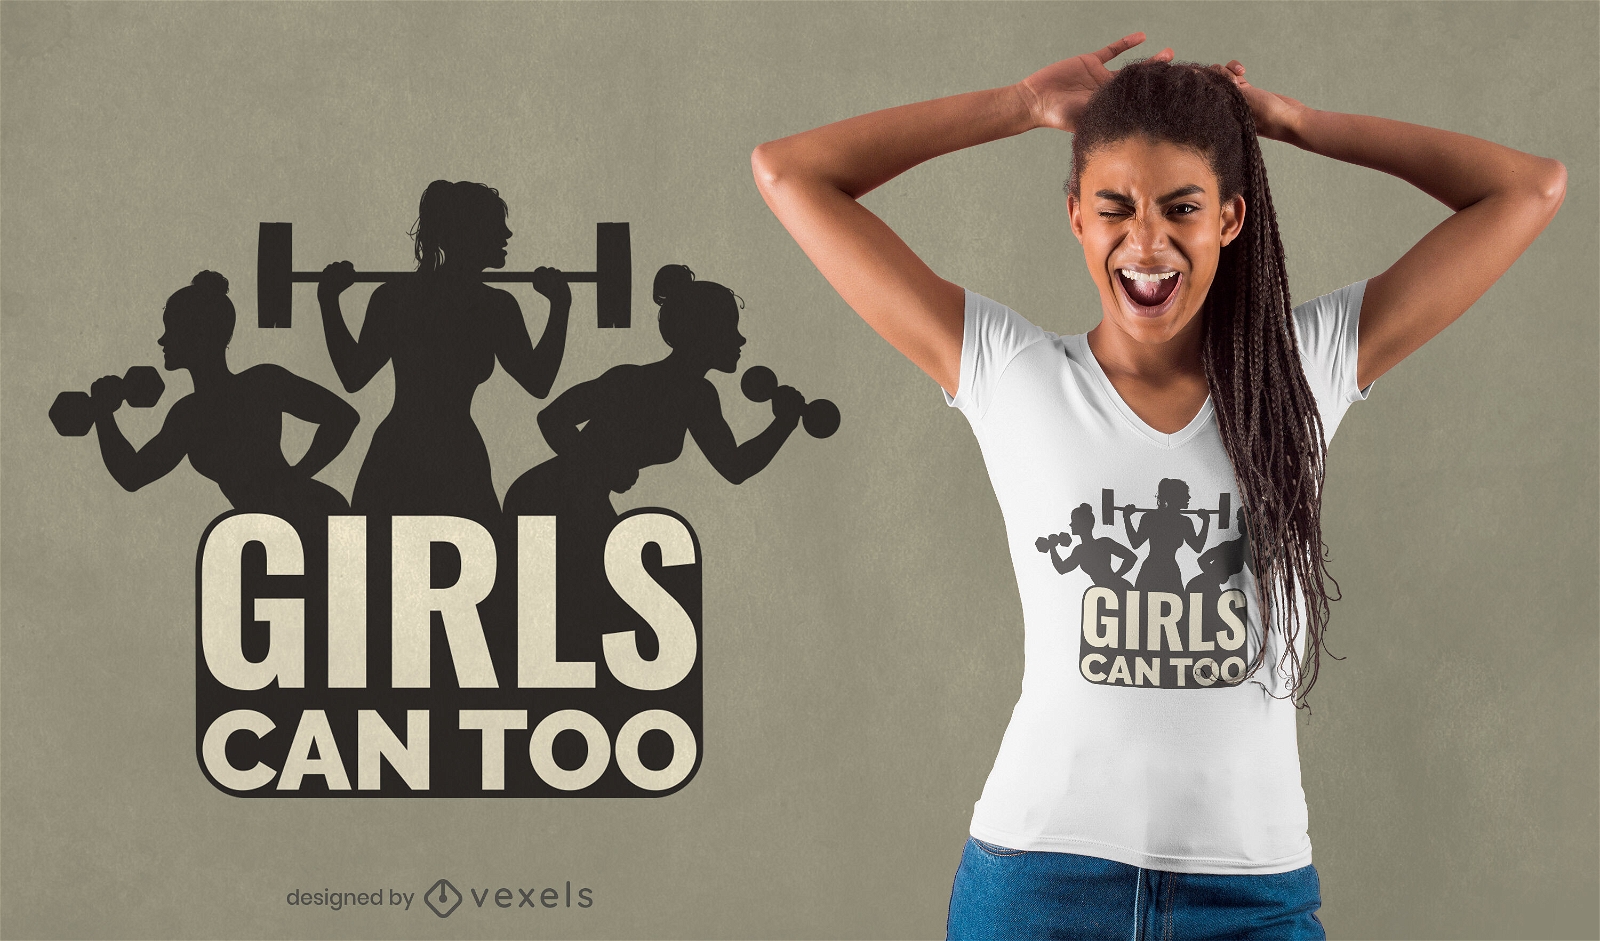 Gym girls can too quote silhouette t-shirt design